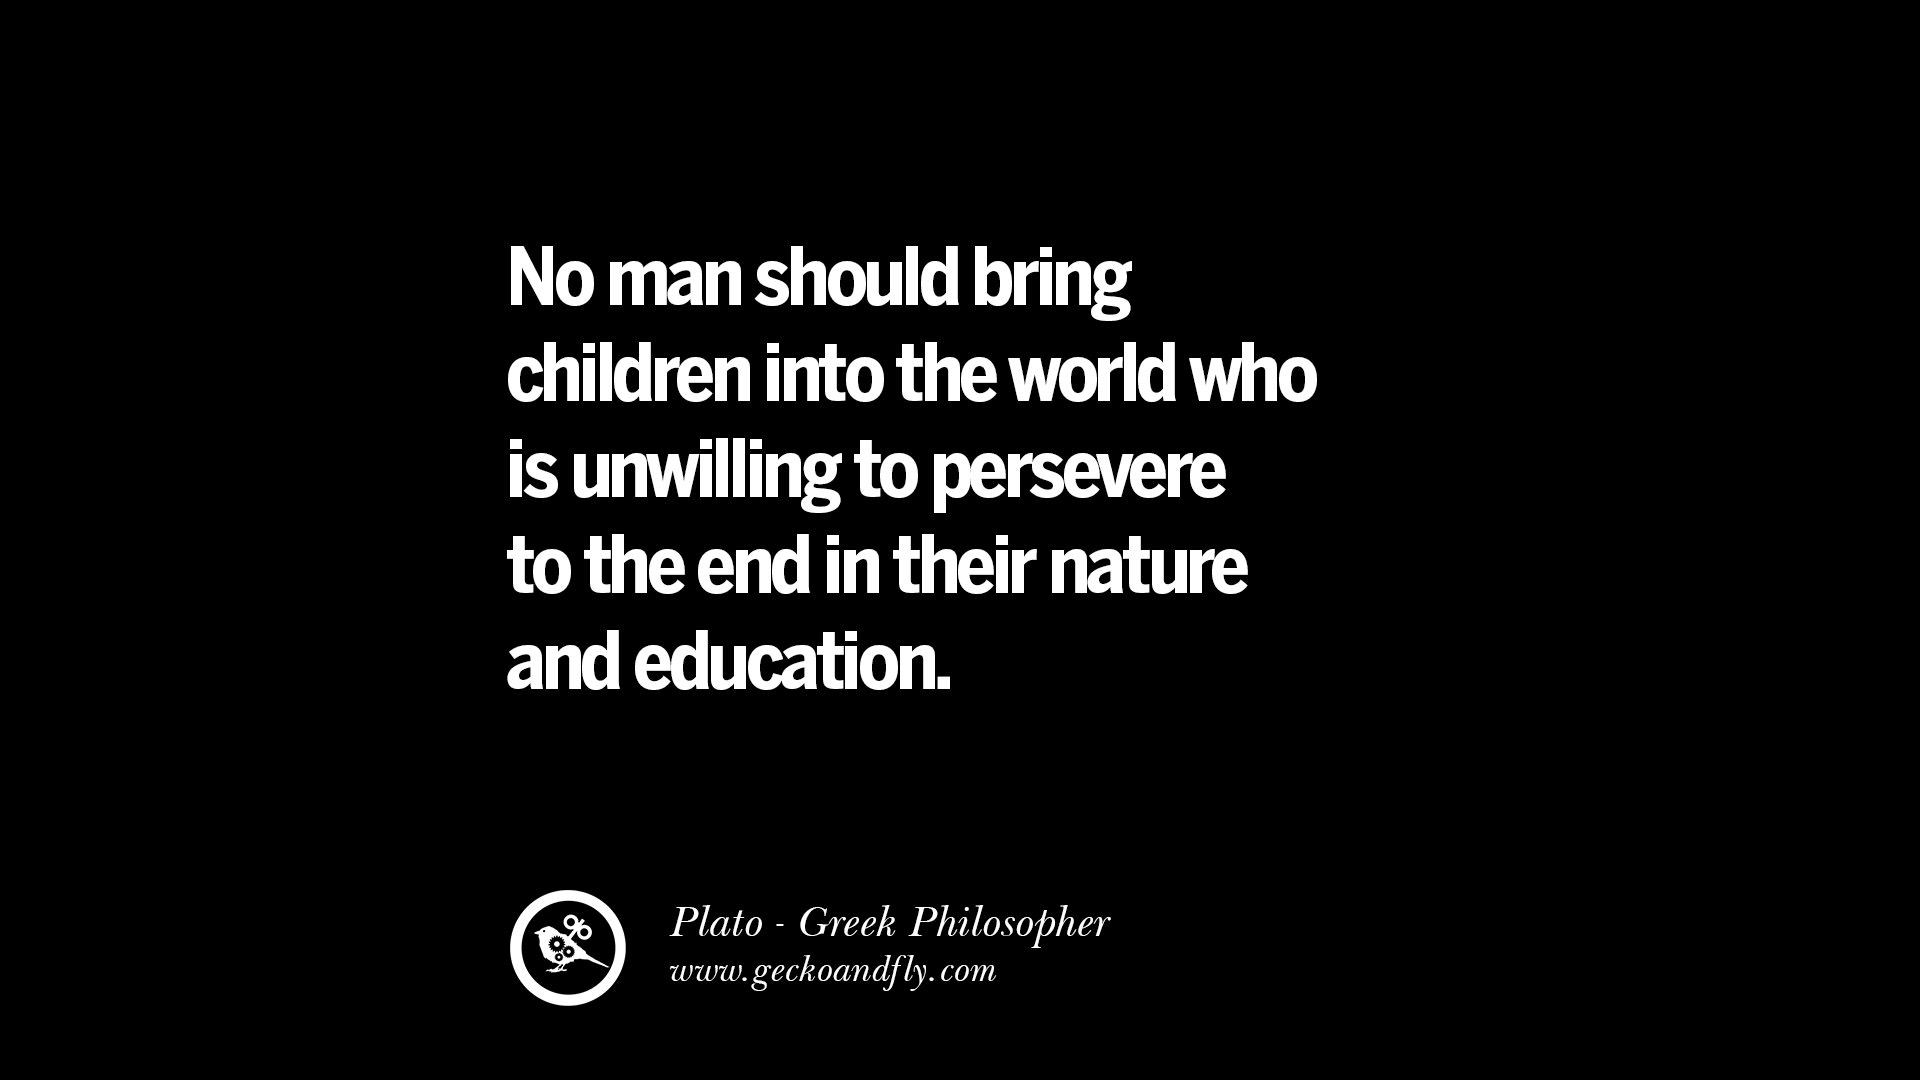 No man should bring children into the world who is unwilling to persevere to the end in their nature and education – Plato